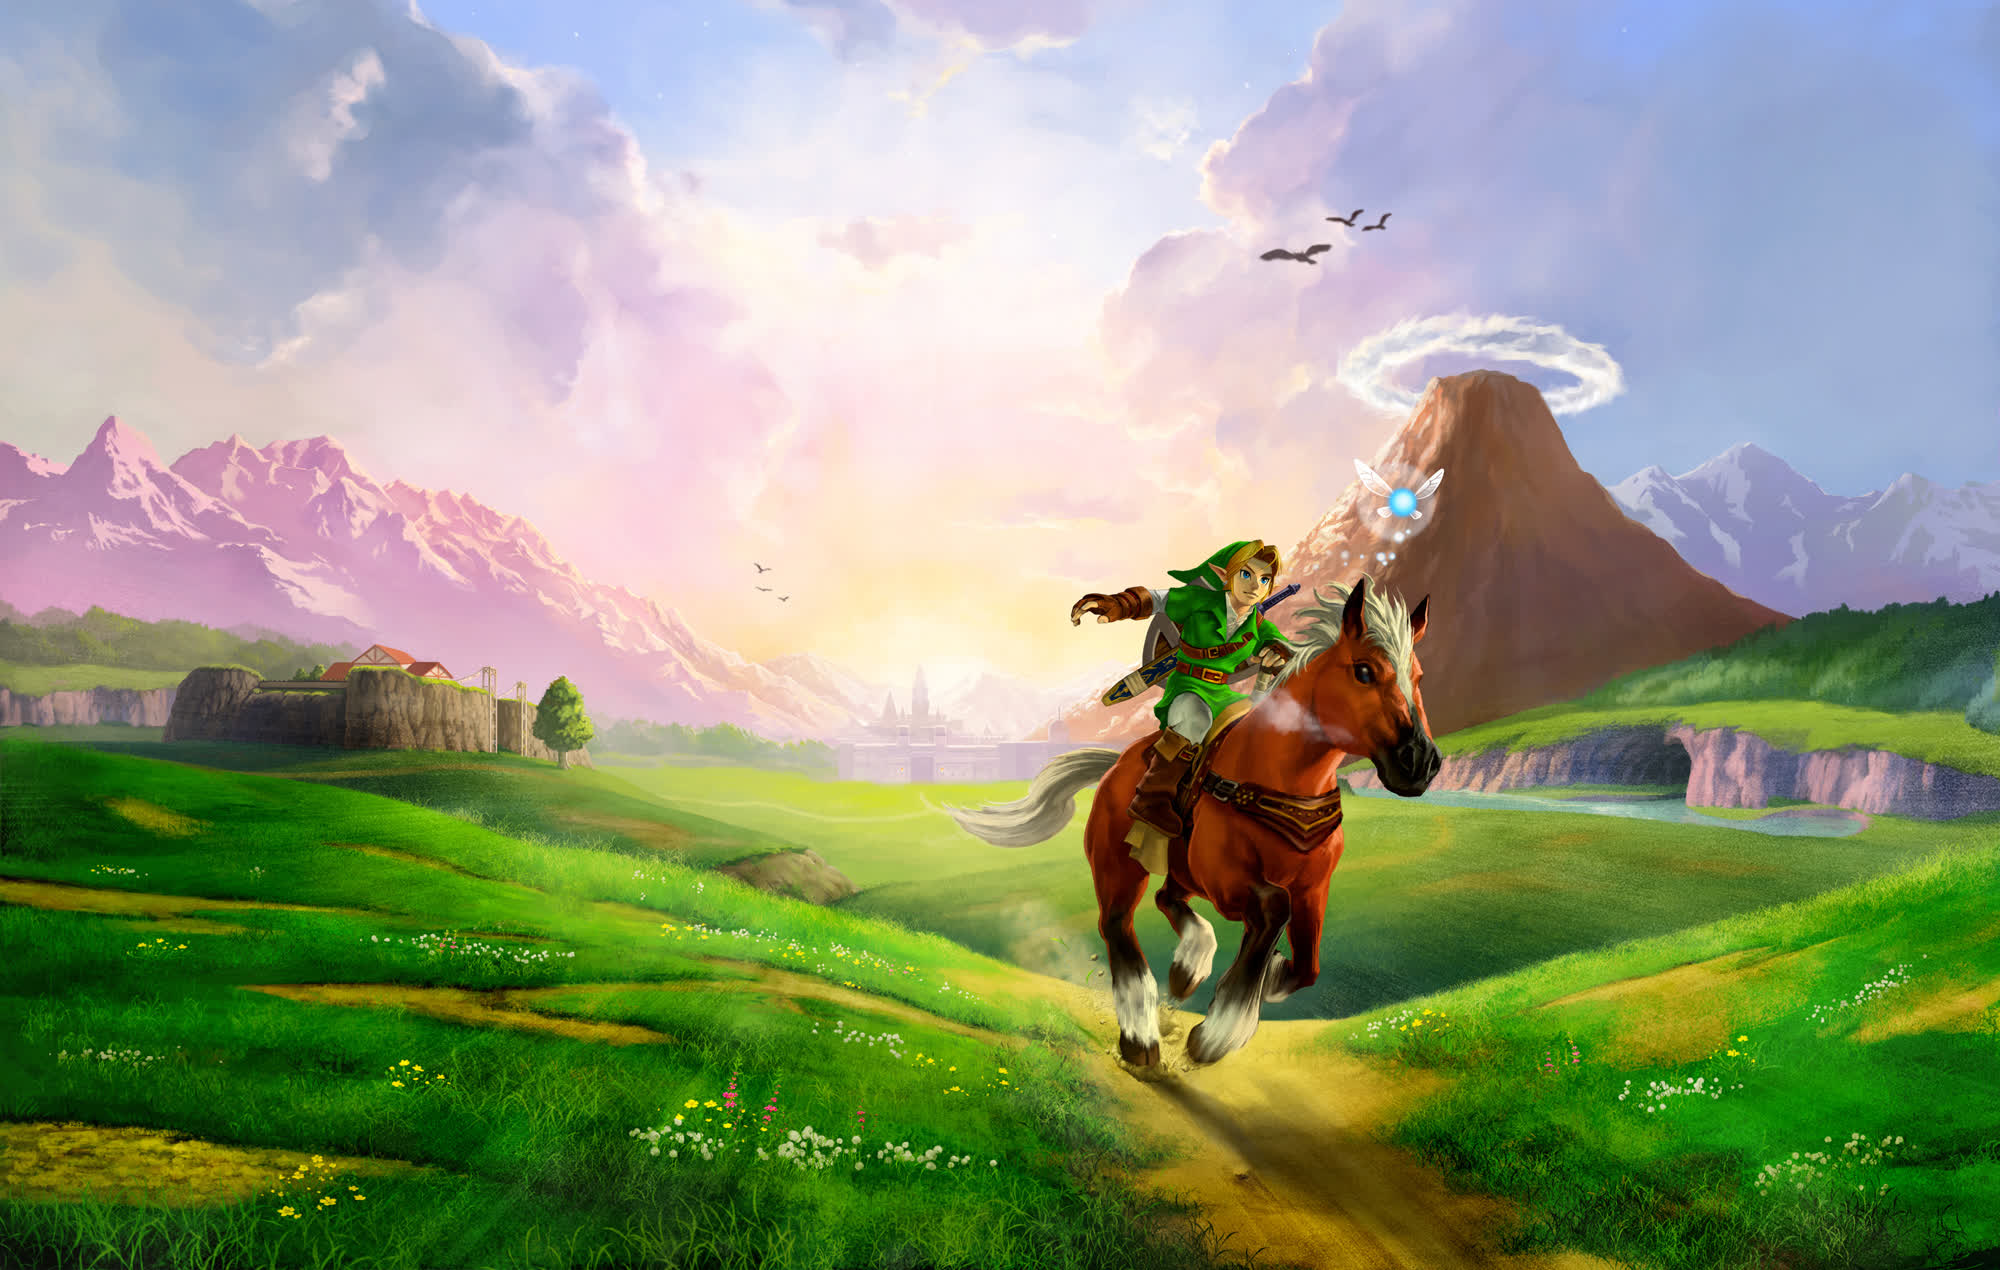 Fan-made Zelda: Ocarina of Time PC port is finished and available online